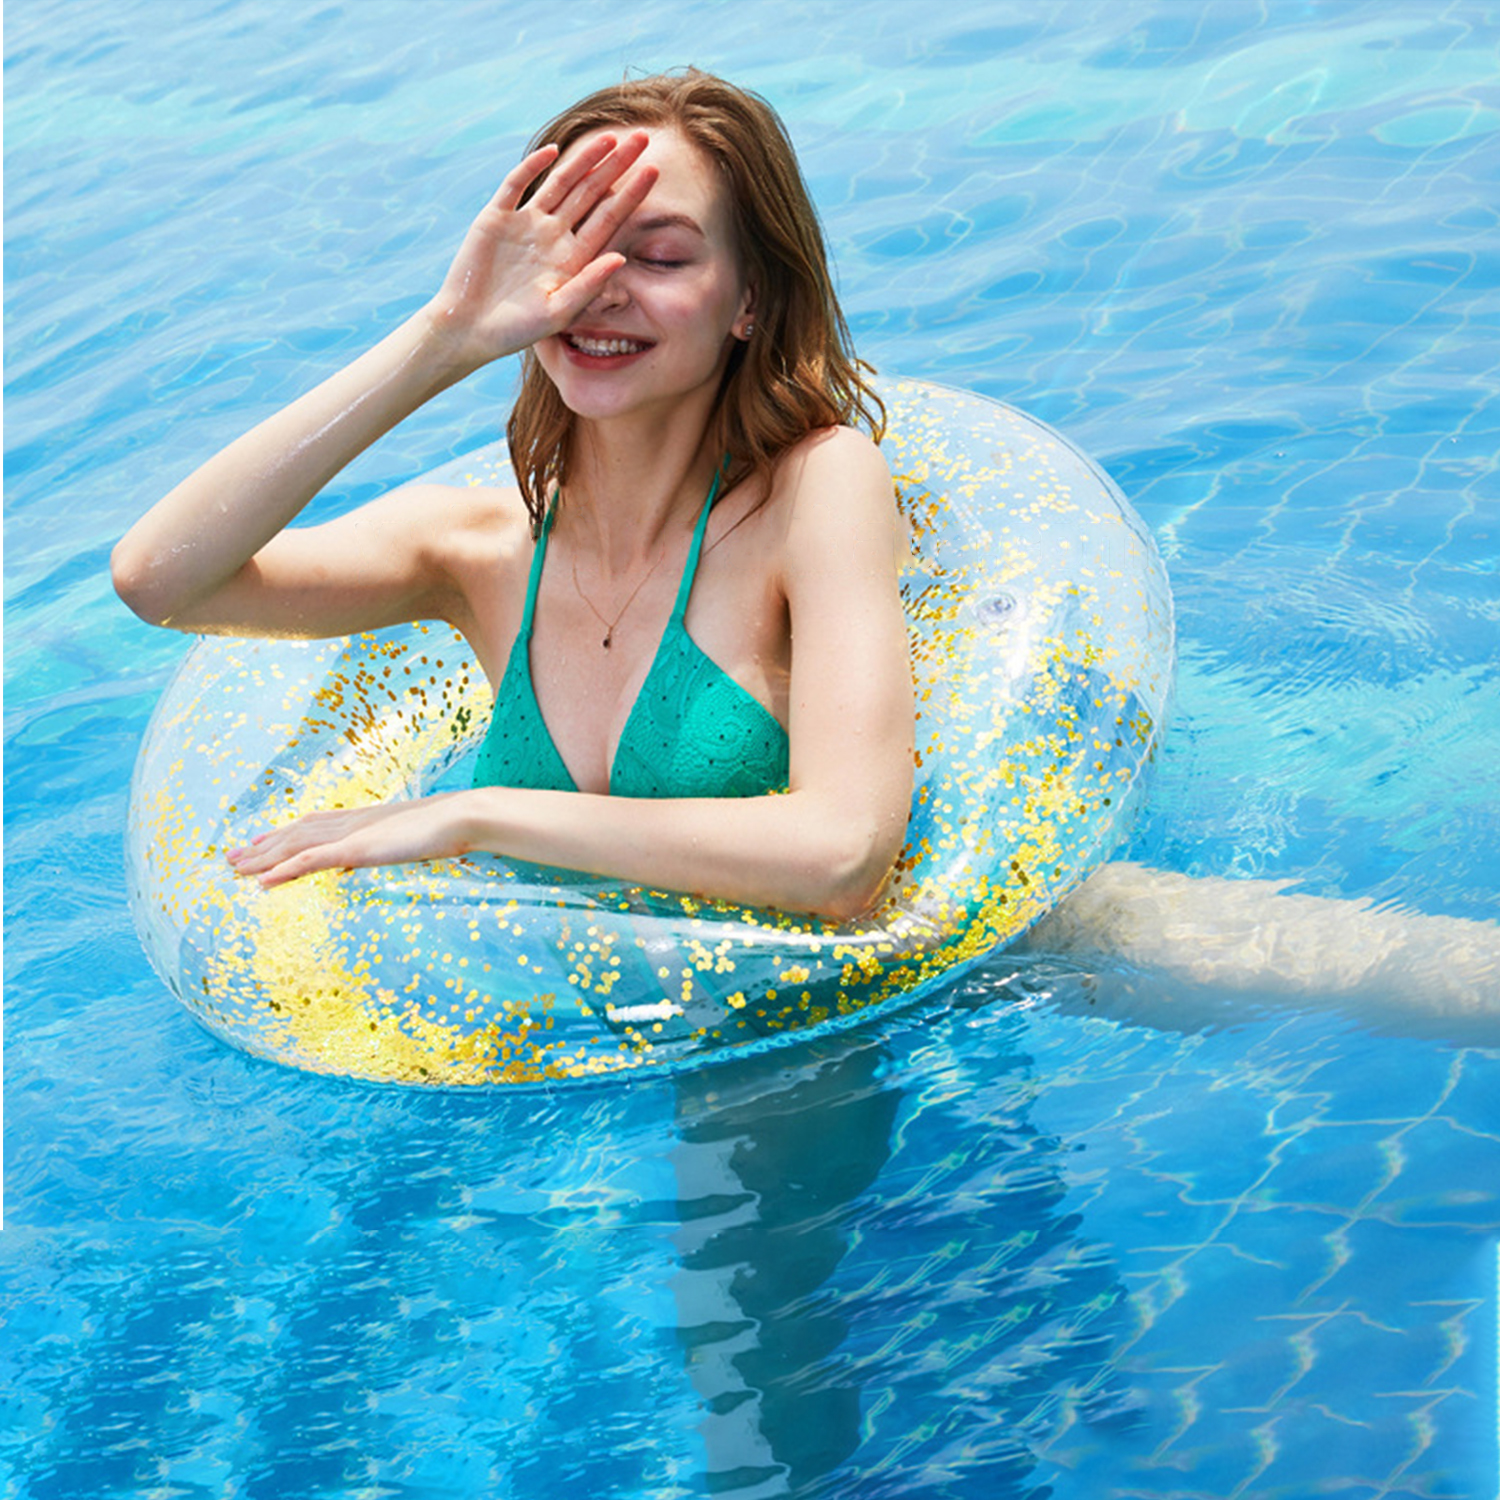 &nbsp;Glitter Swim Ring - Extra Large for The Pool Beach or Lake-Kids Teens Adults Glitter Inside Sparkles and Shines in The Sun - The Original Glitter Inflatable Tube Floats - image 4 of 8